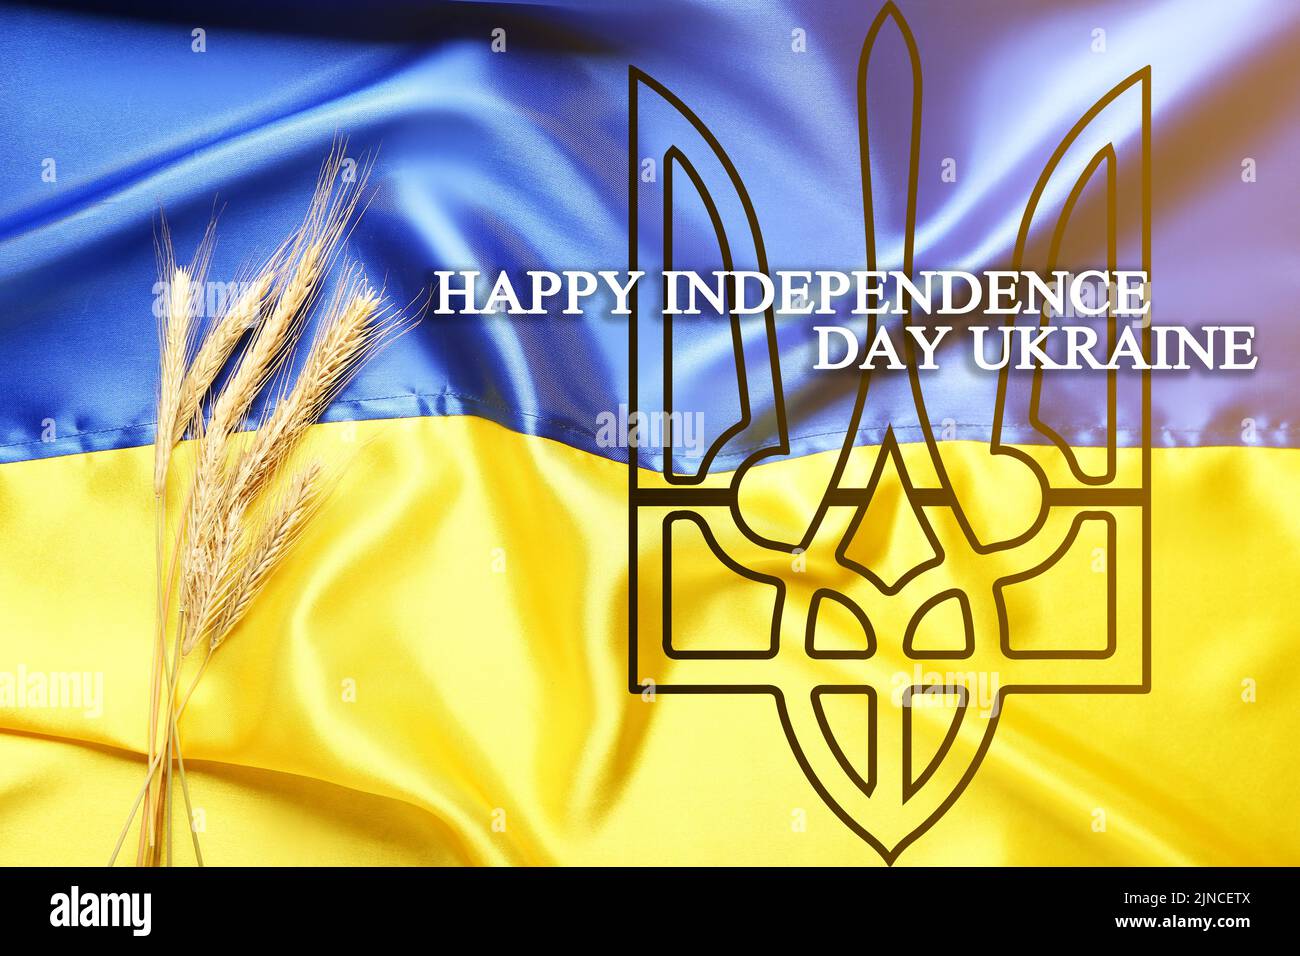 Poster for Ukrainian Independence Day with flag and wheat spikelets Stock Photo